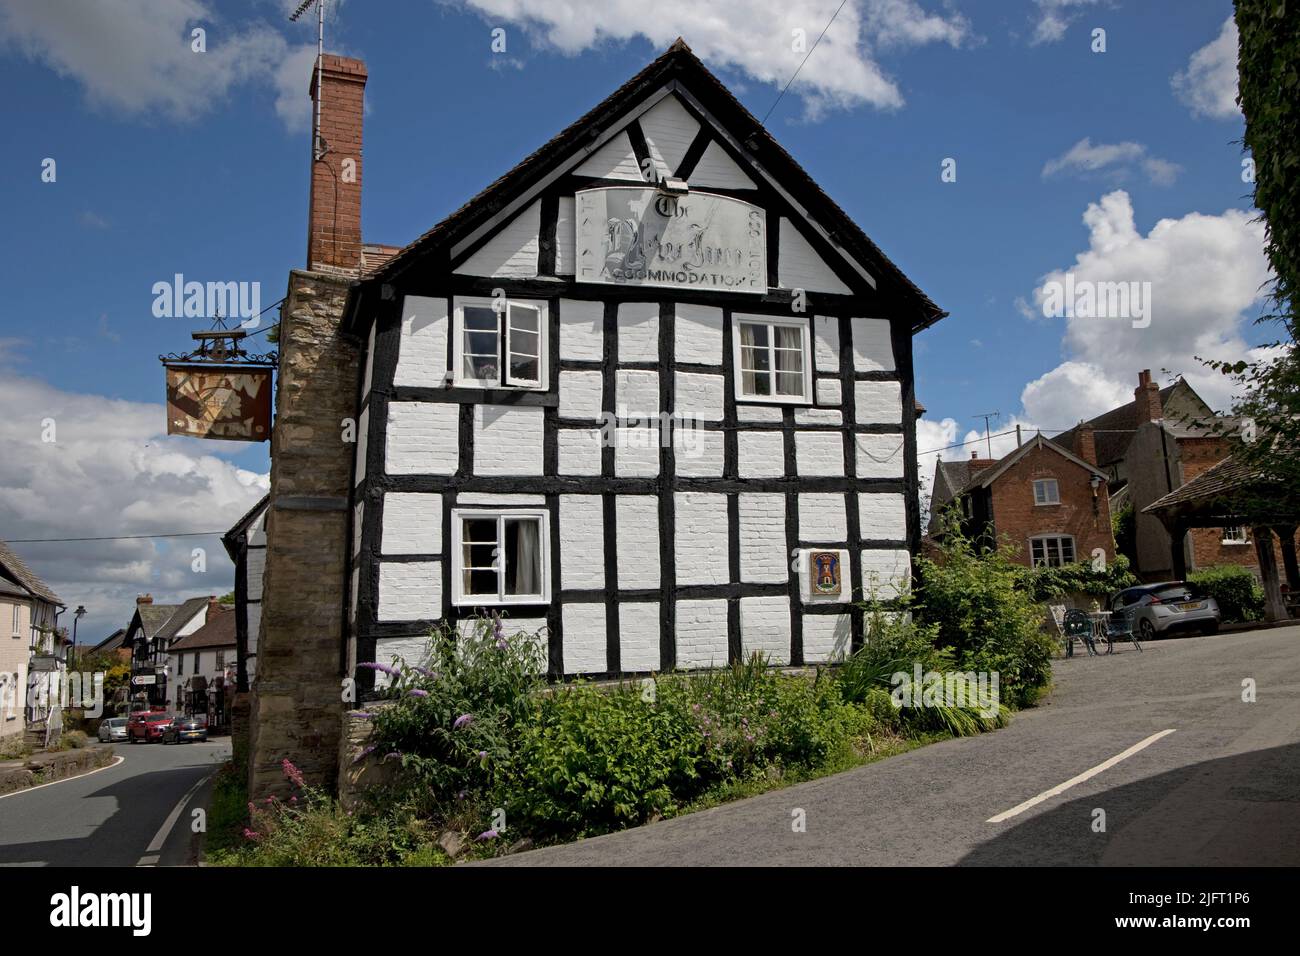 The New Inn is a listed medieaval half-timbered old coaching inn which is now a Public House in Pembridge Herefordshire UK Stock Photo